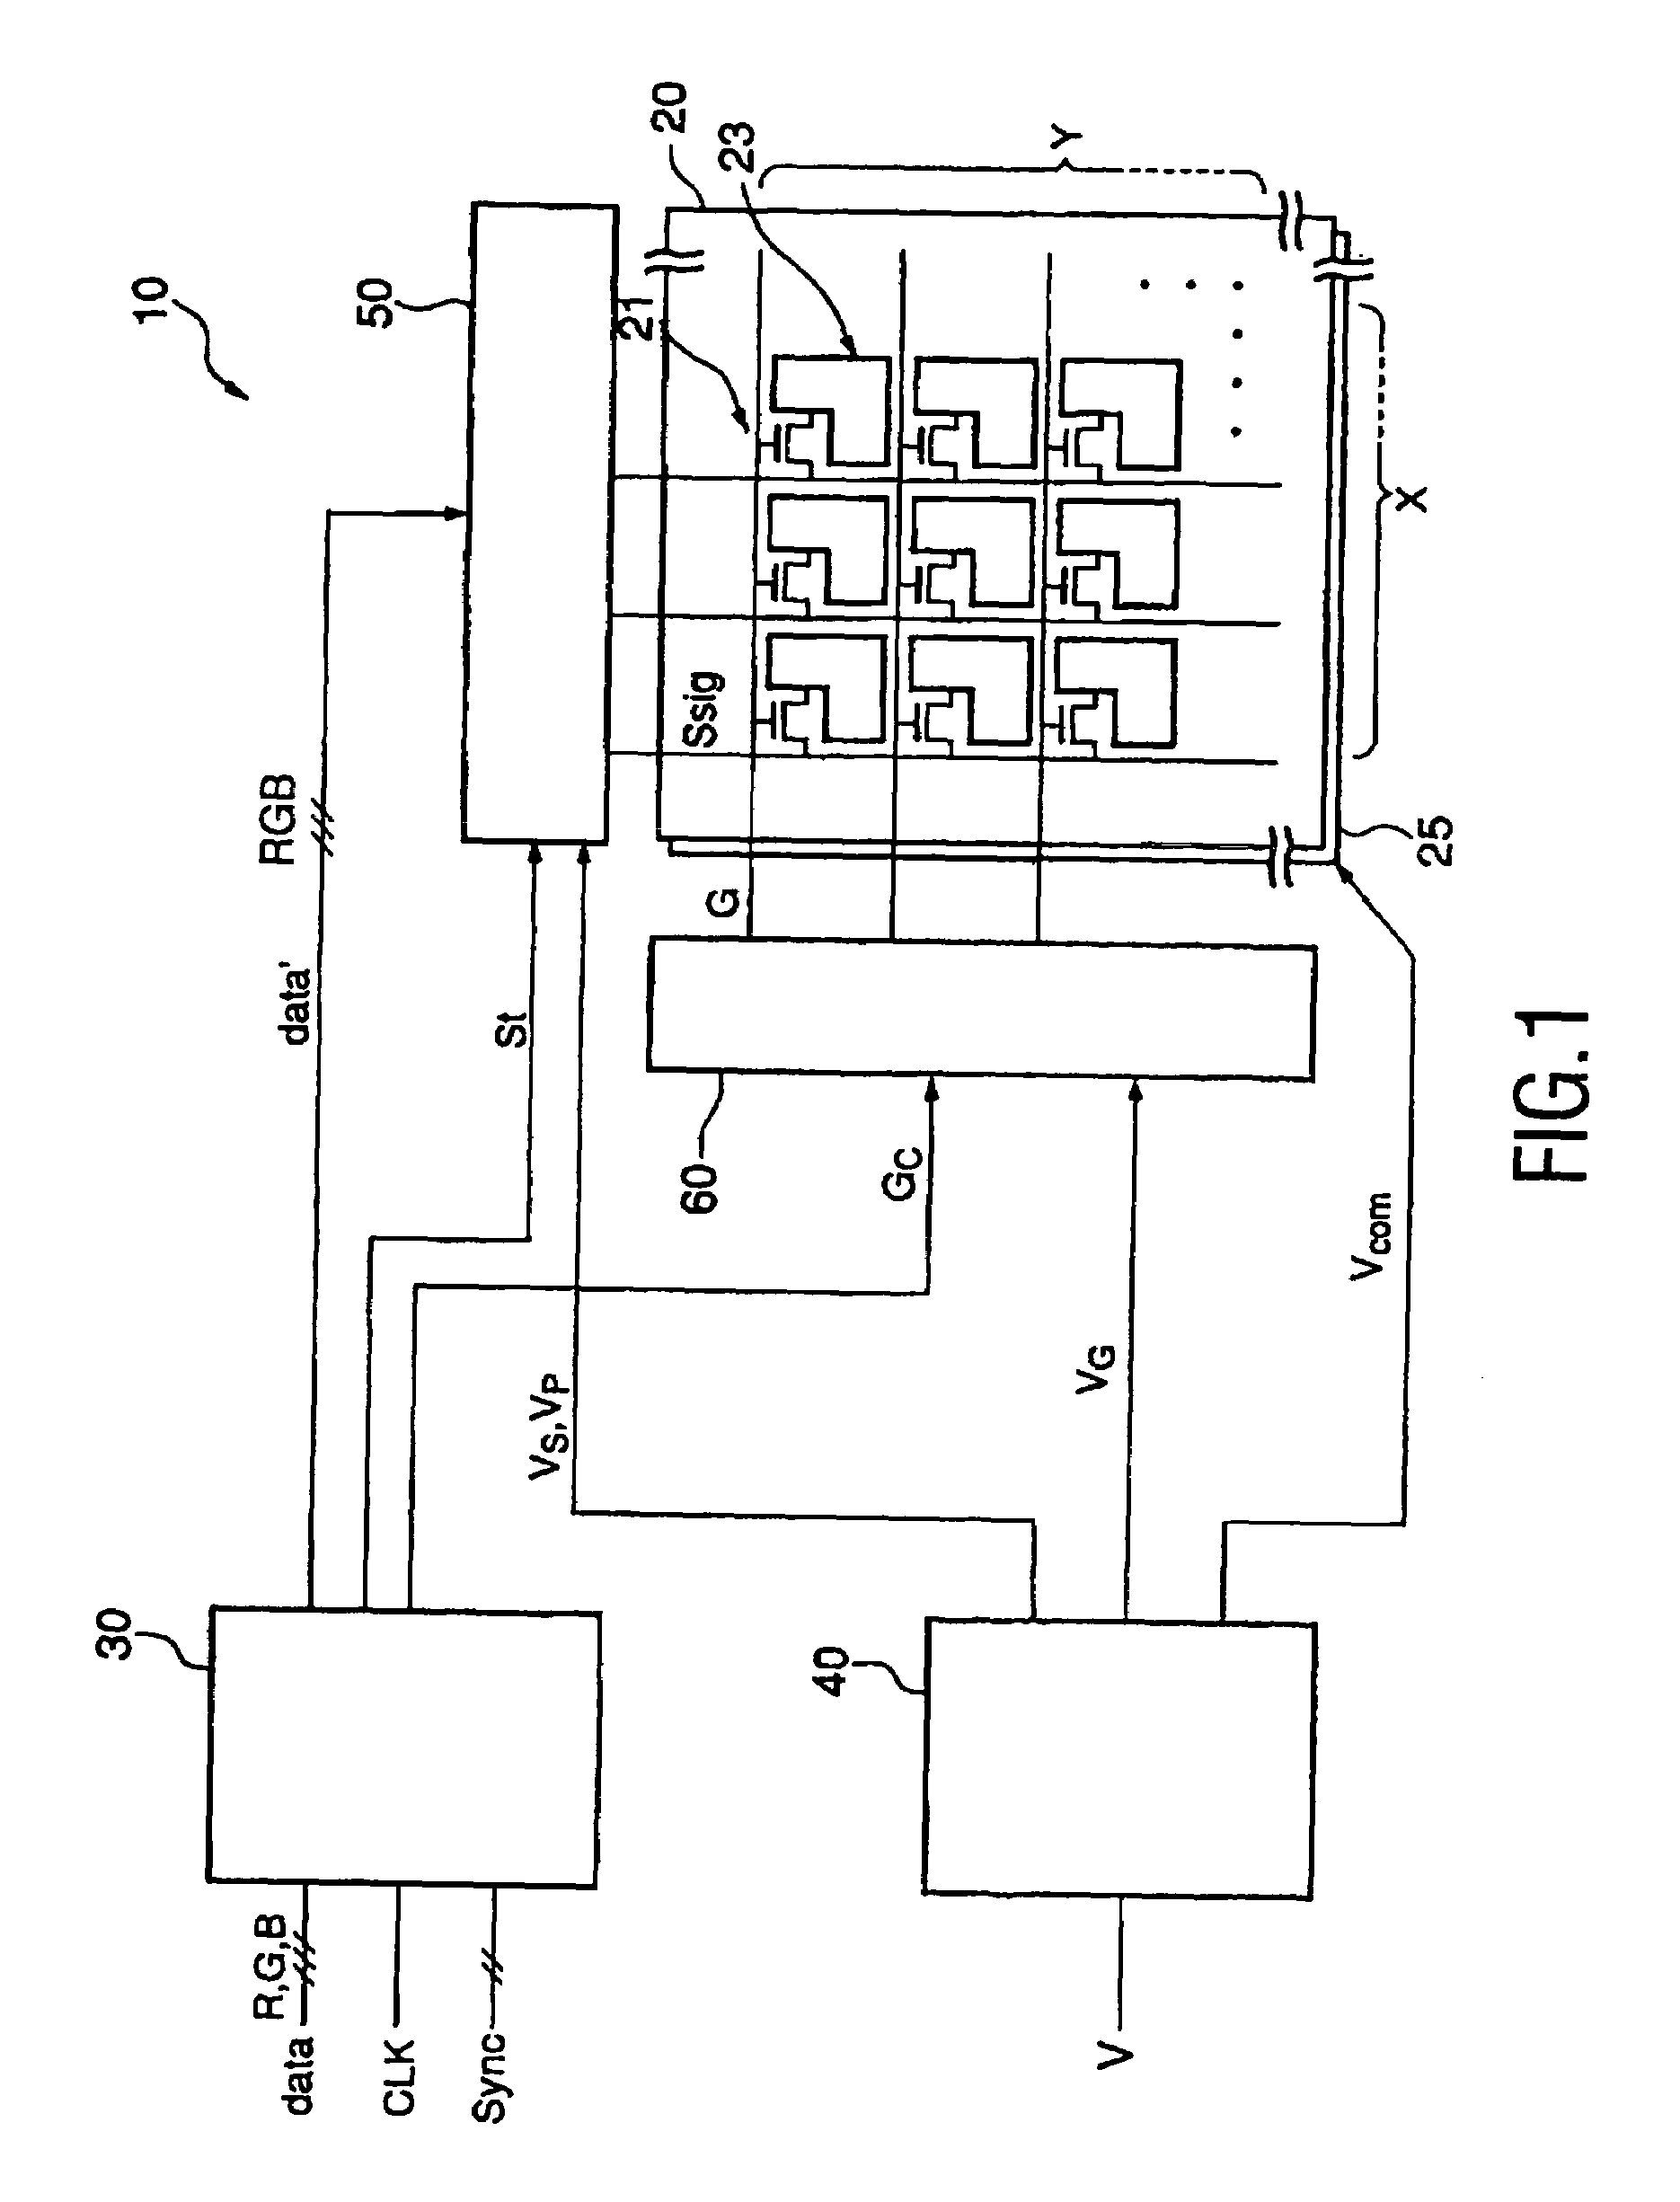 Column electrode driving circuit and voltage generating circuit for a liquid crystal display